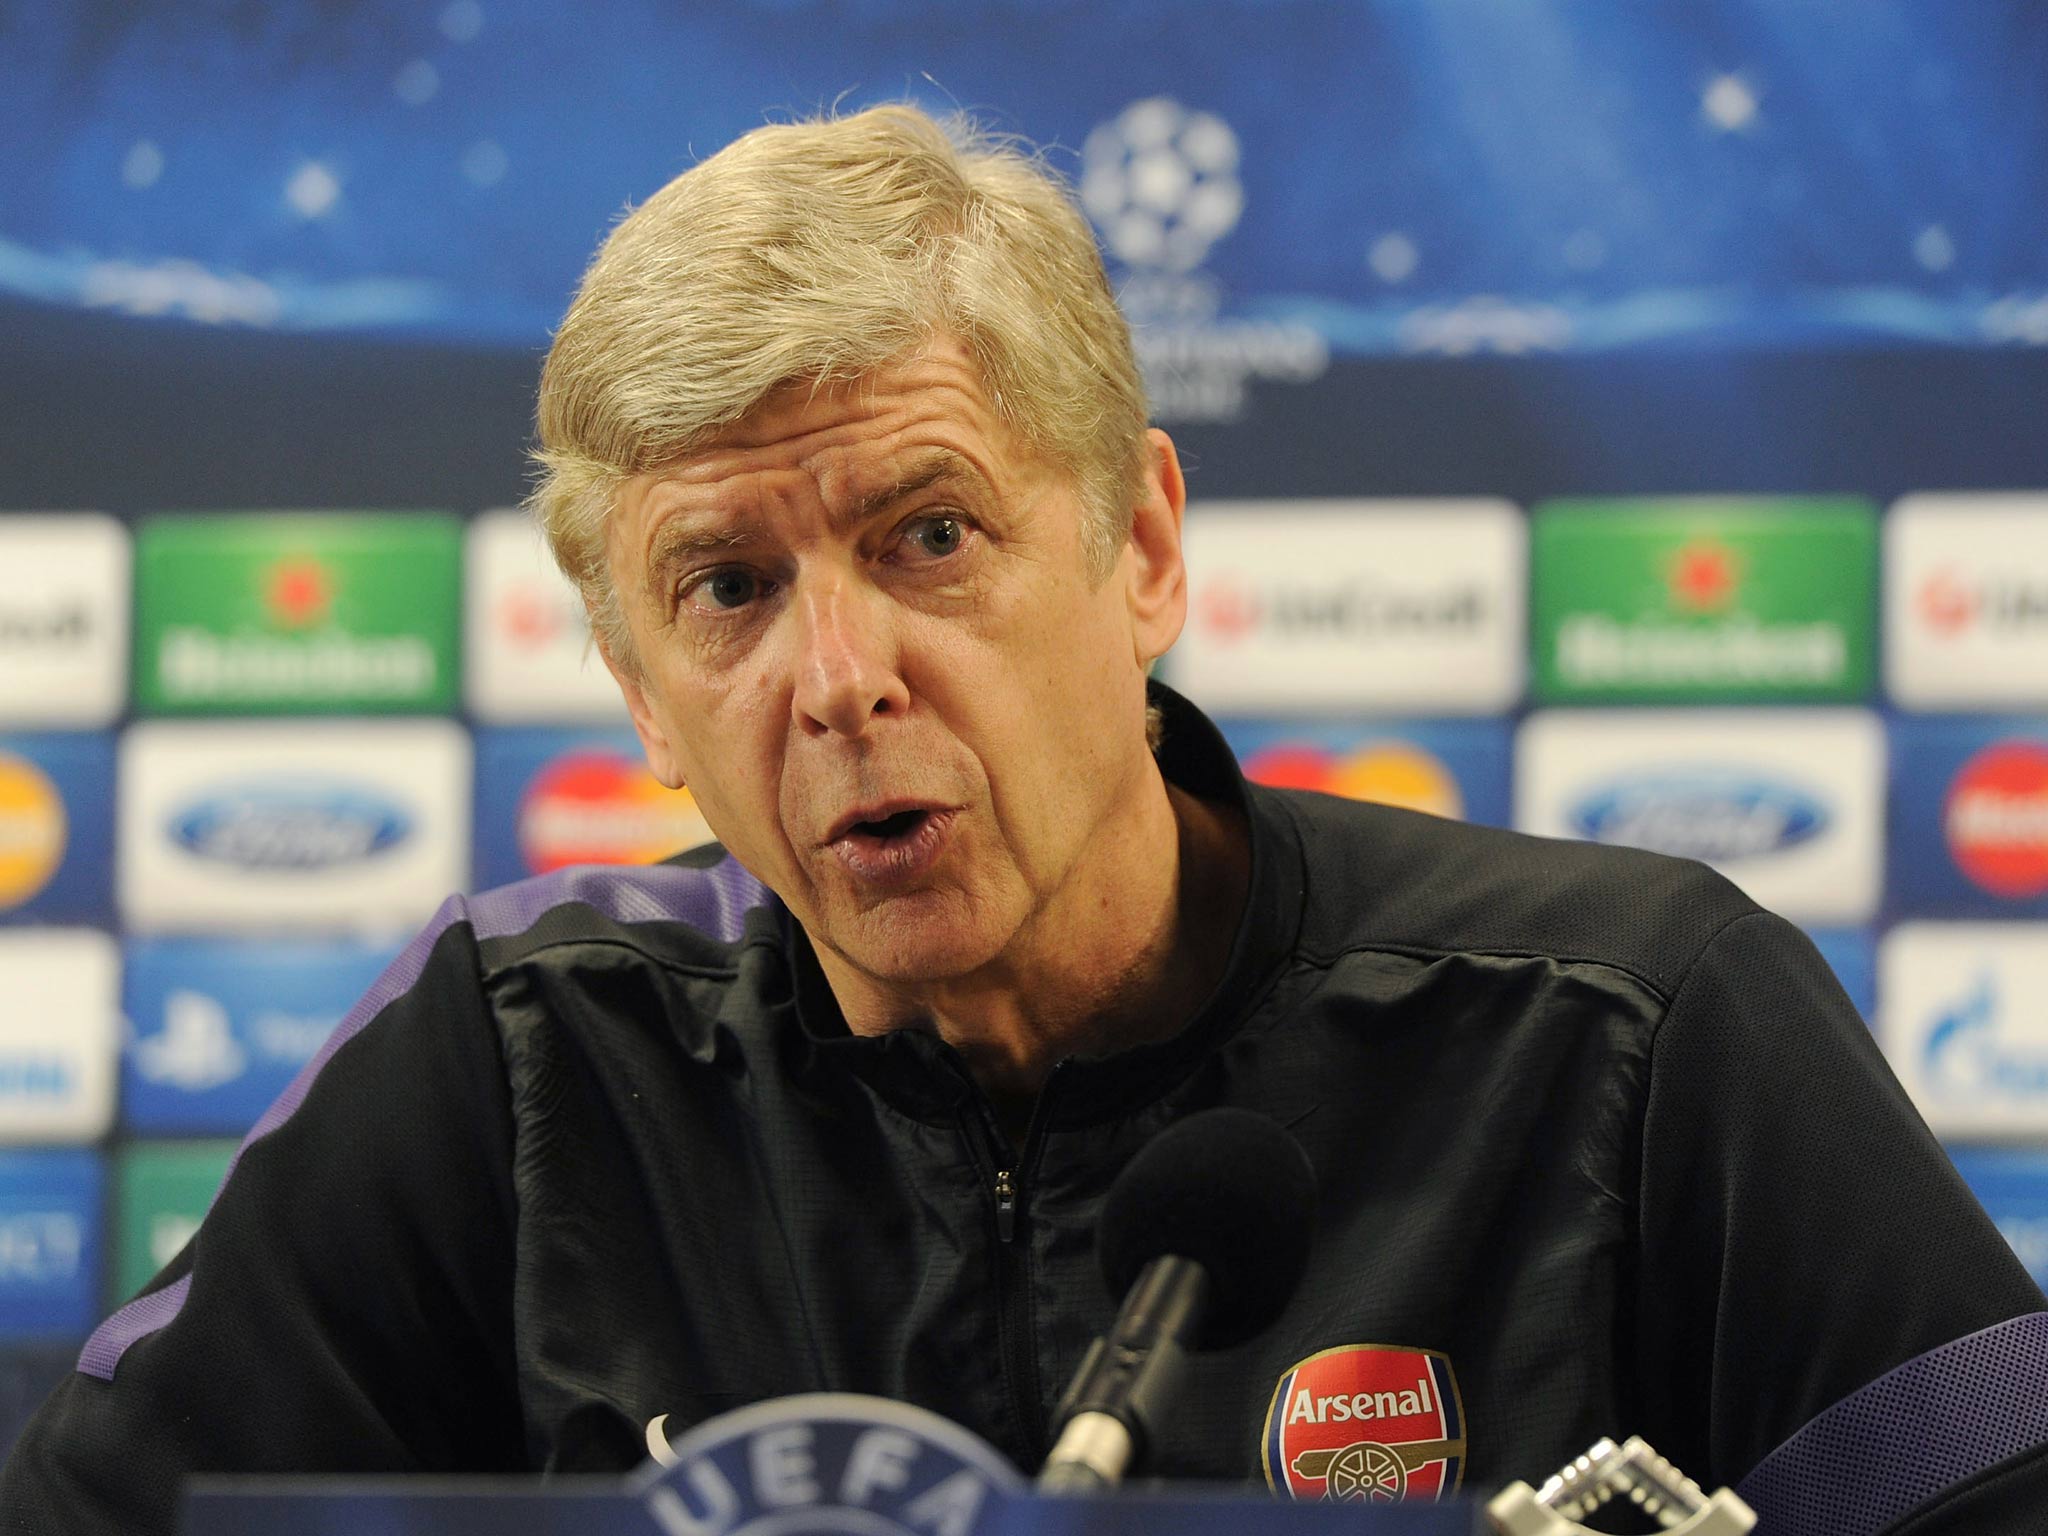 Arsenal manager Arsene Wenger speaks to the media ahead of his side's tie against Bayern Munich